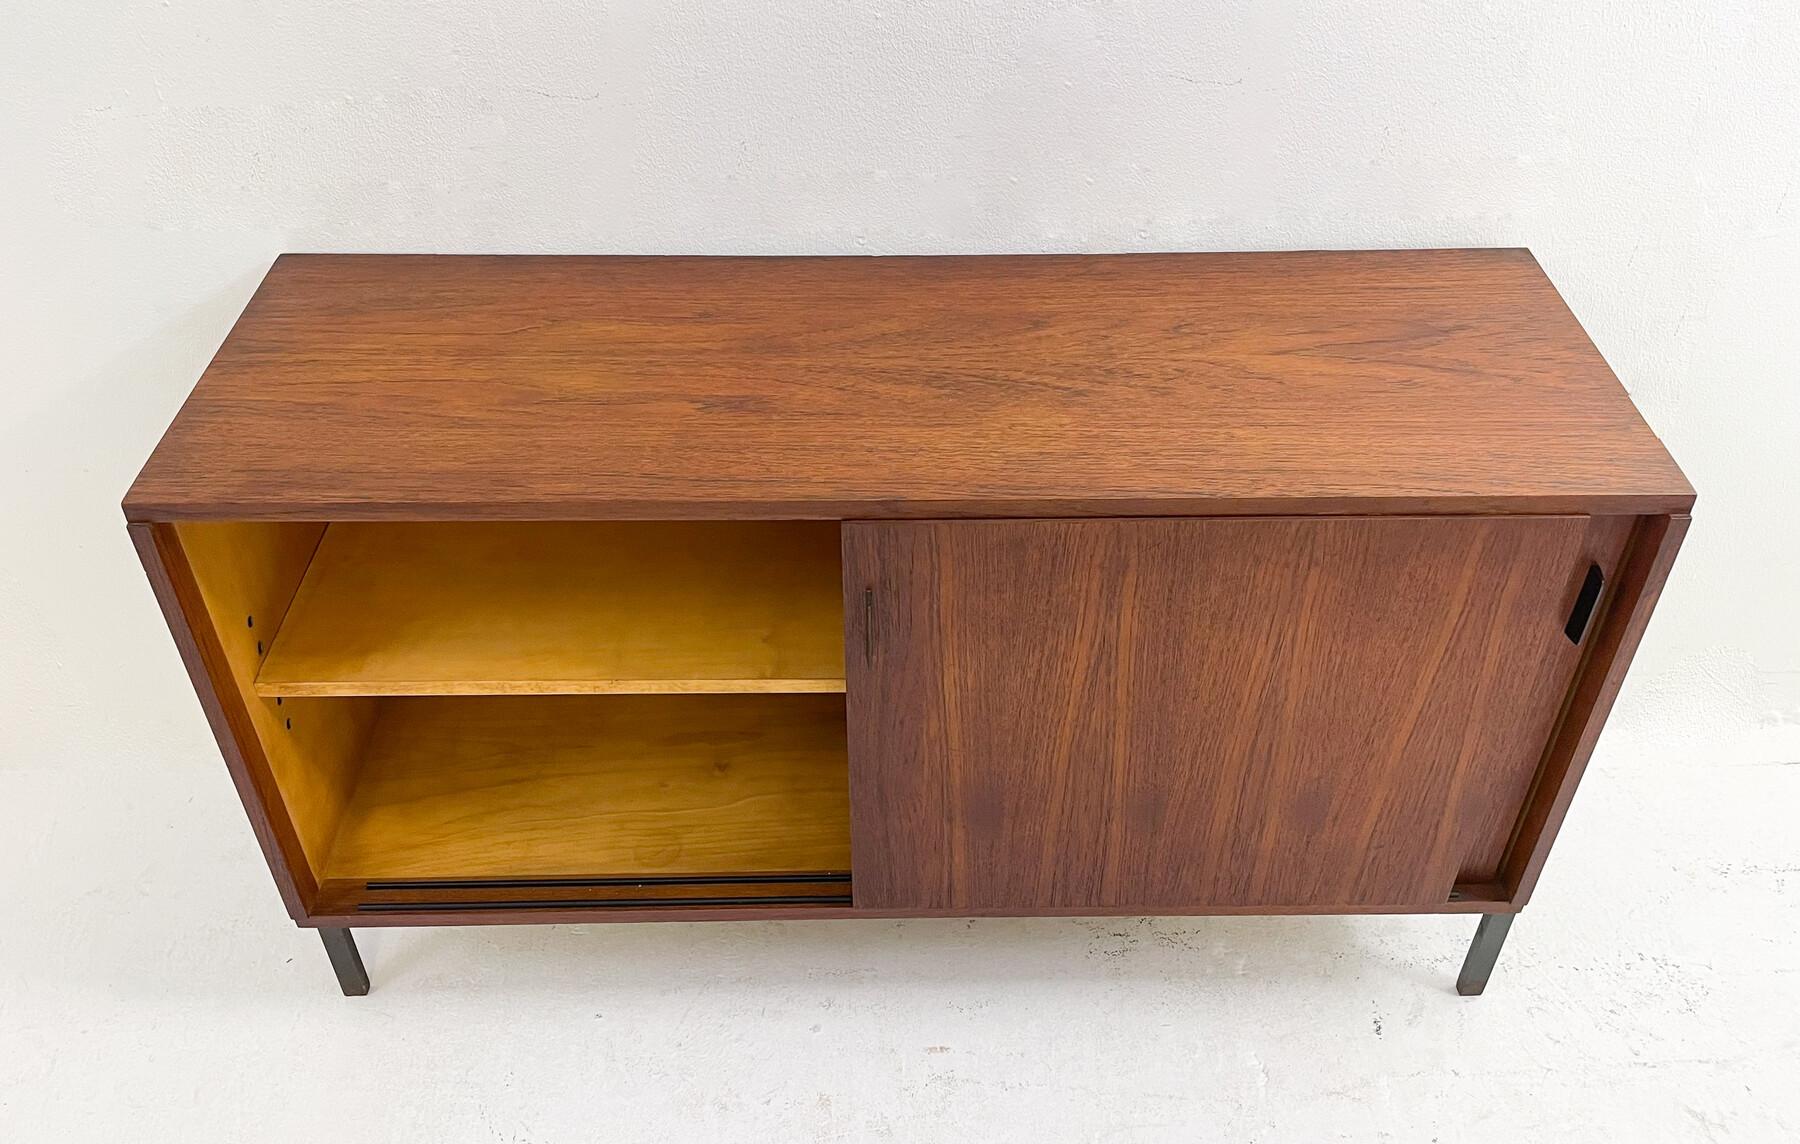 Mid-Century Modern Sideboard, Wood, Germany, 1960s - 2 Available In Good Condition For Sale In Brussels, BE